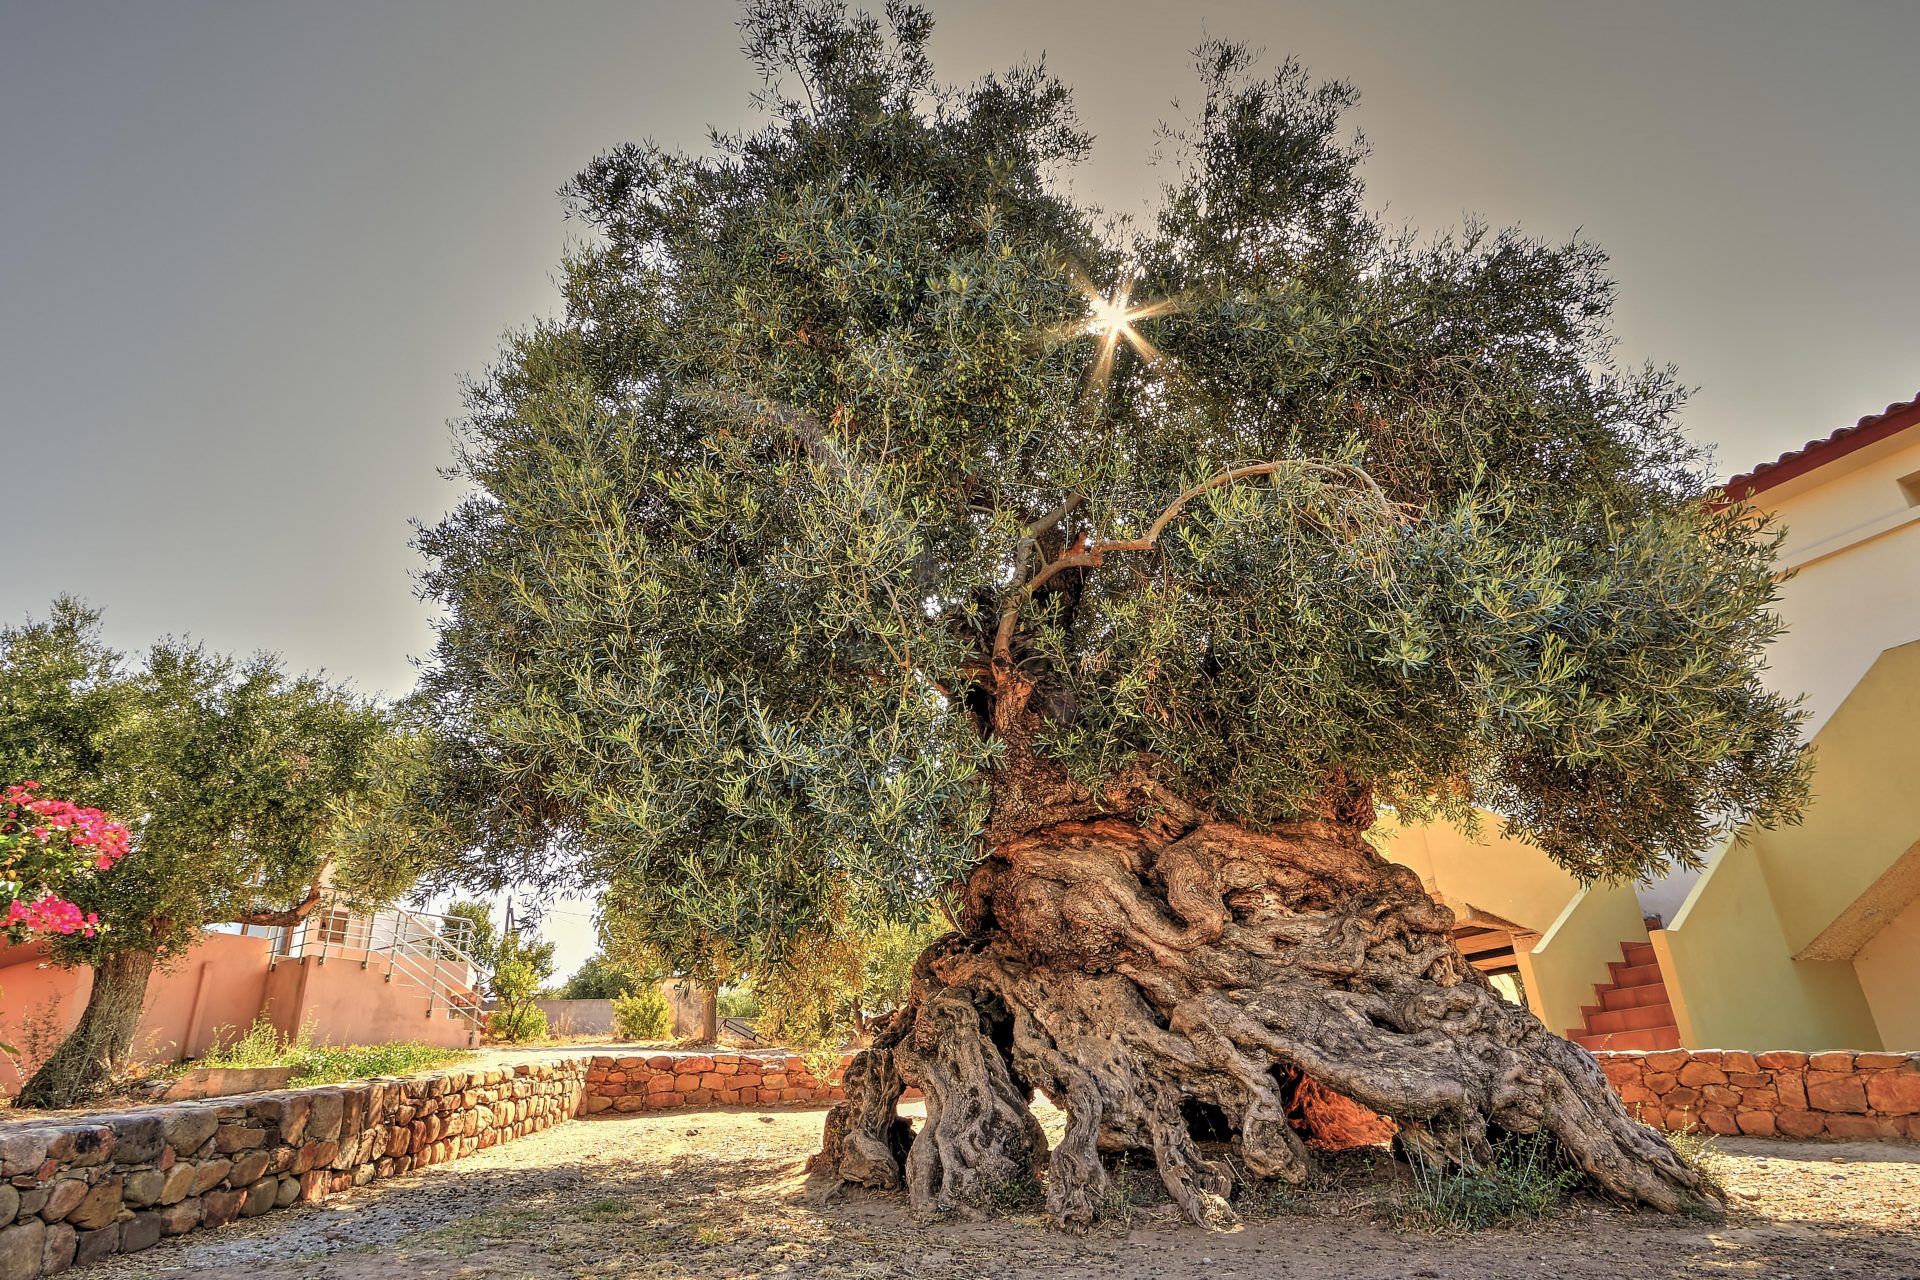 Olive Tree of Vouves, Greece - Over 3,000 years old